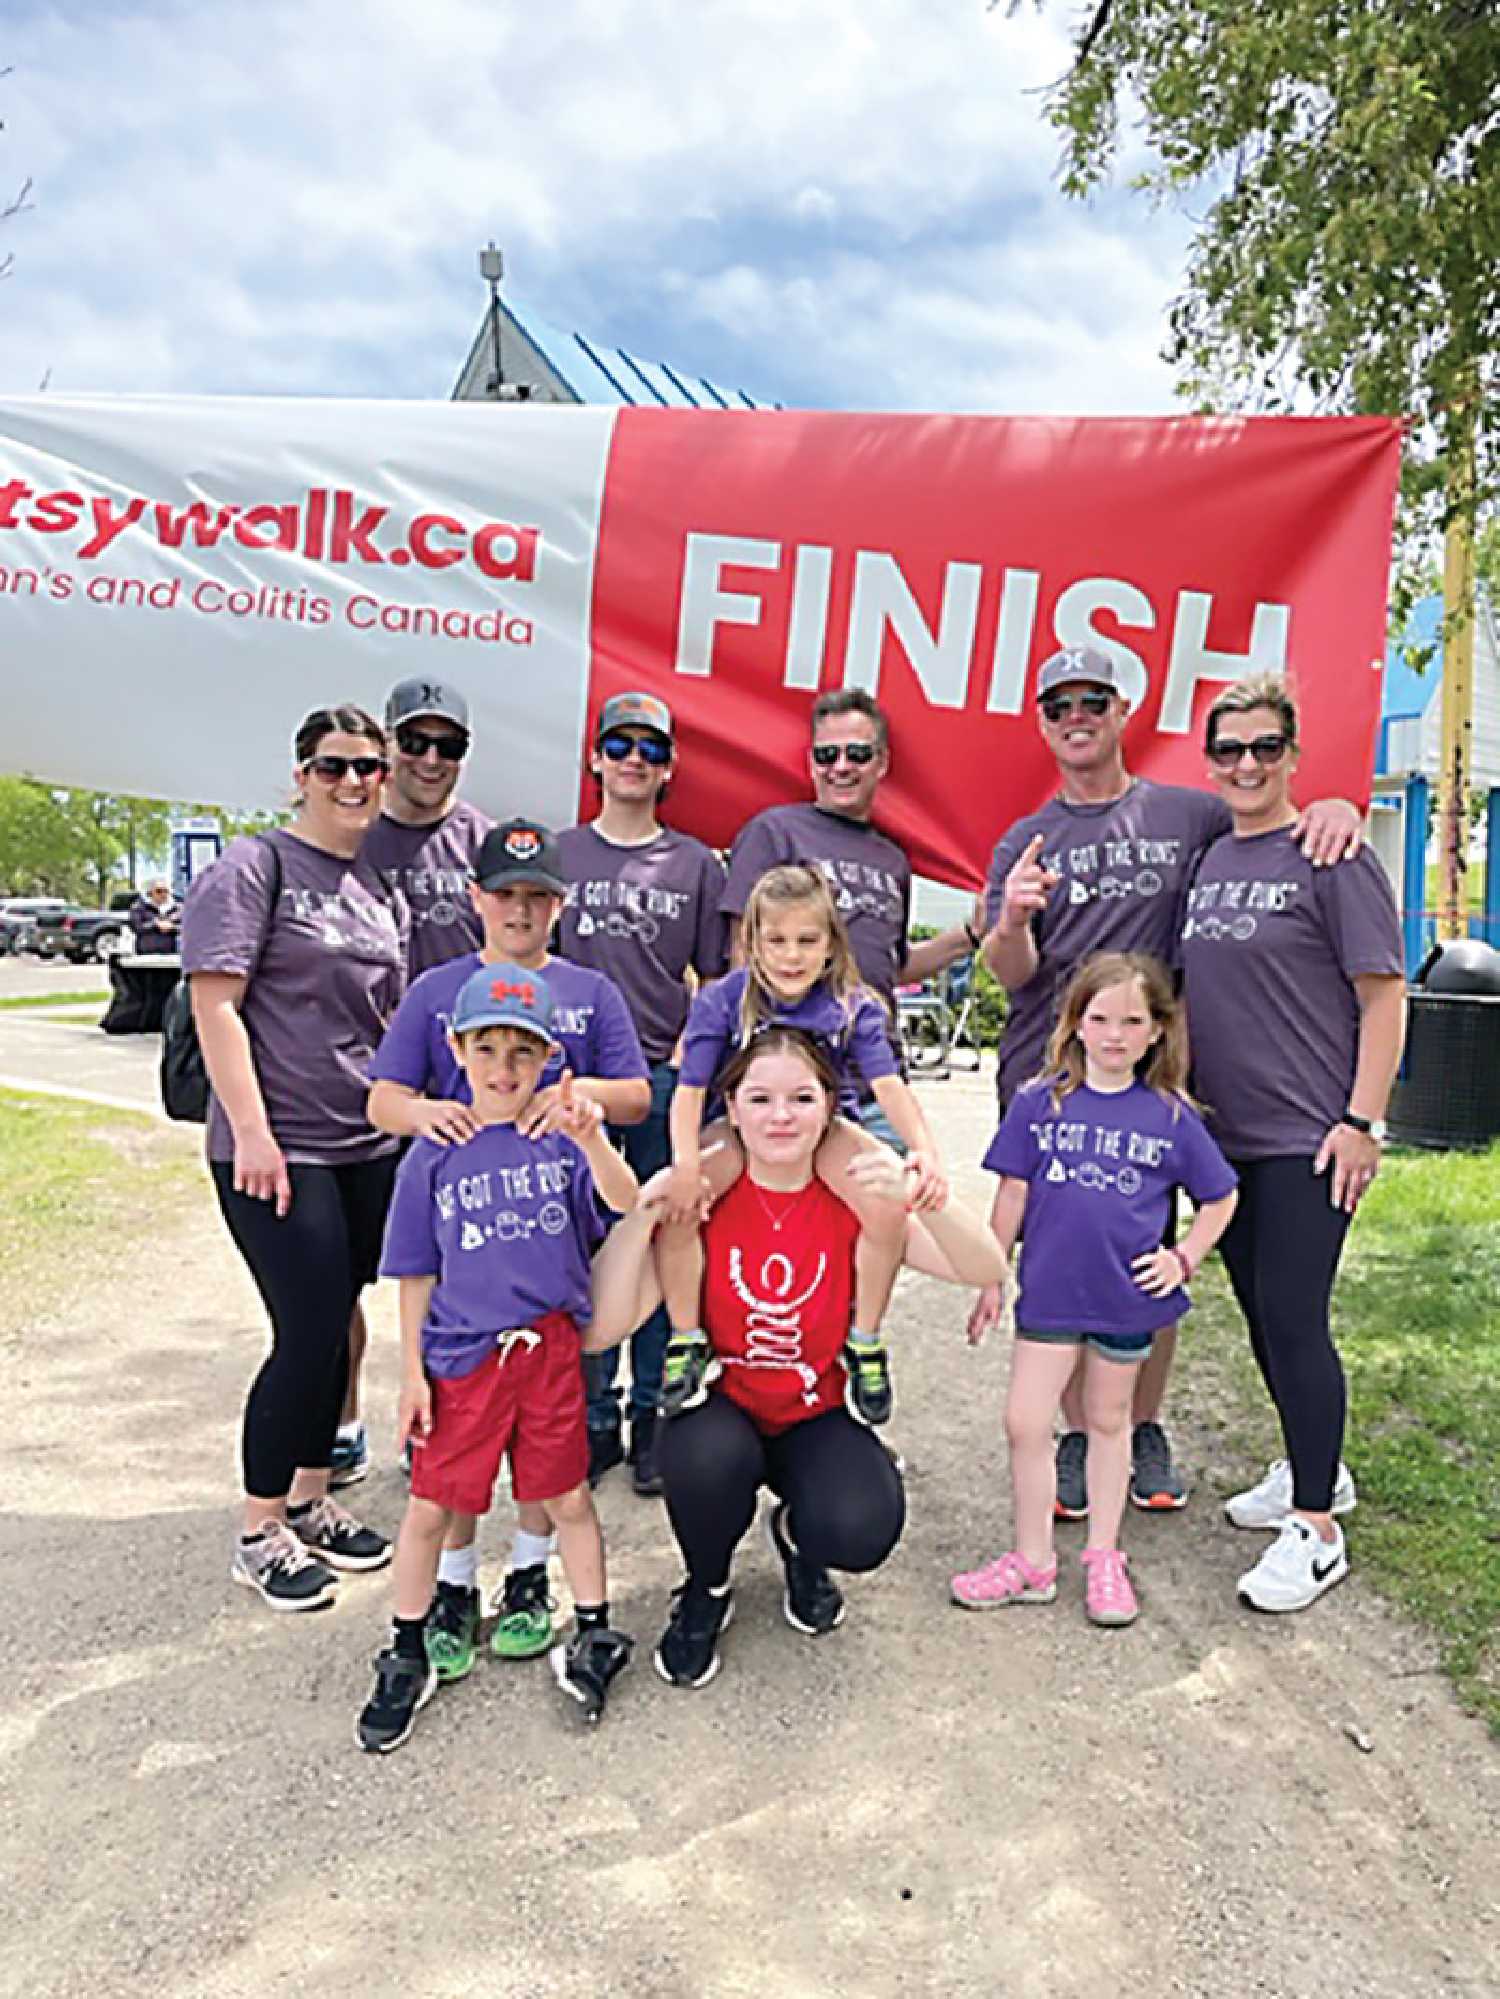 Charlie Leslie’s family came with her to Regina in support of her being the honorary chair for the event. Part of her role was cutting the ribbon for the start of the 2022 Gutsy Walk.